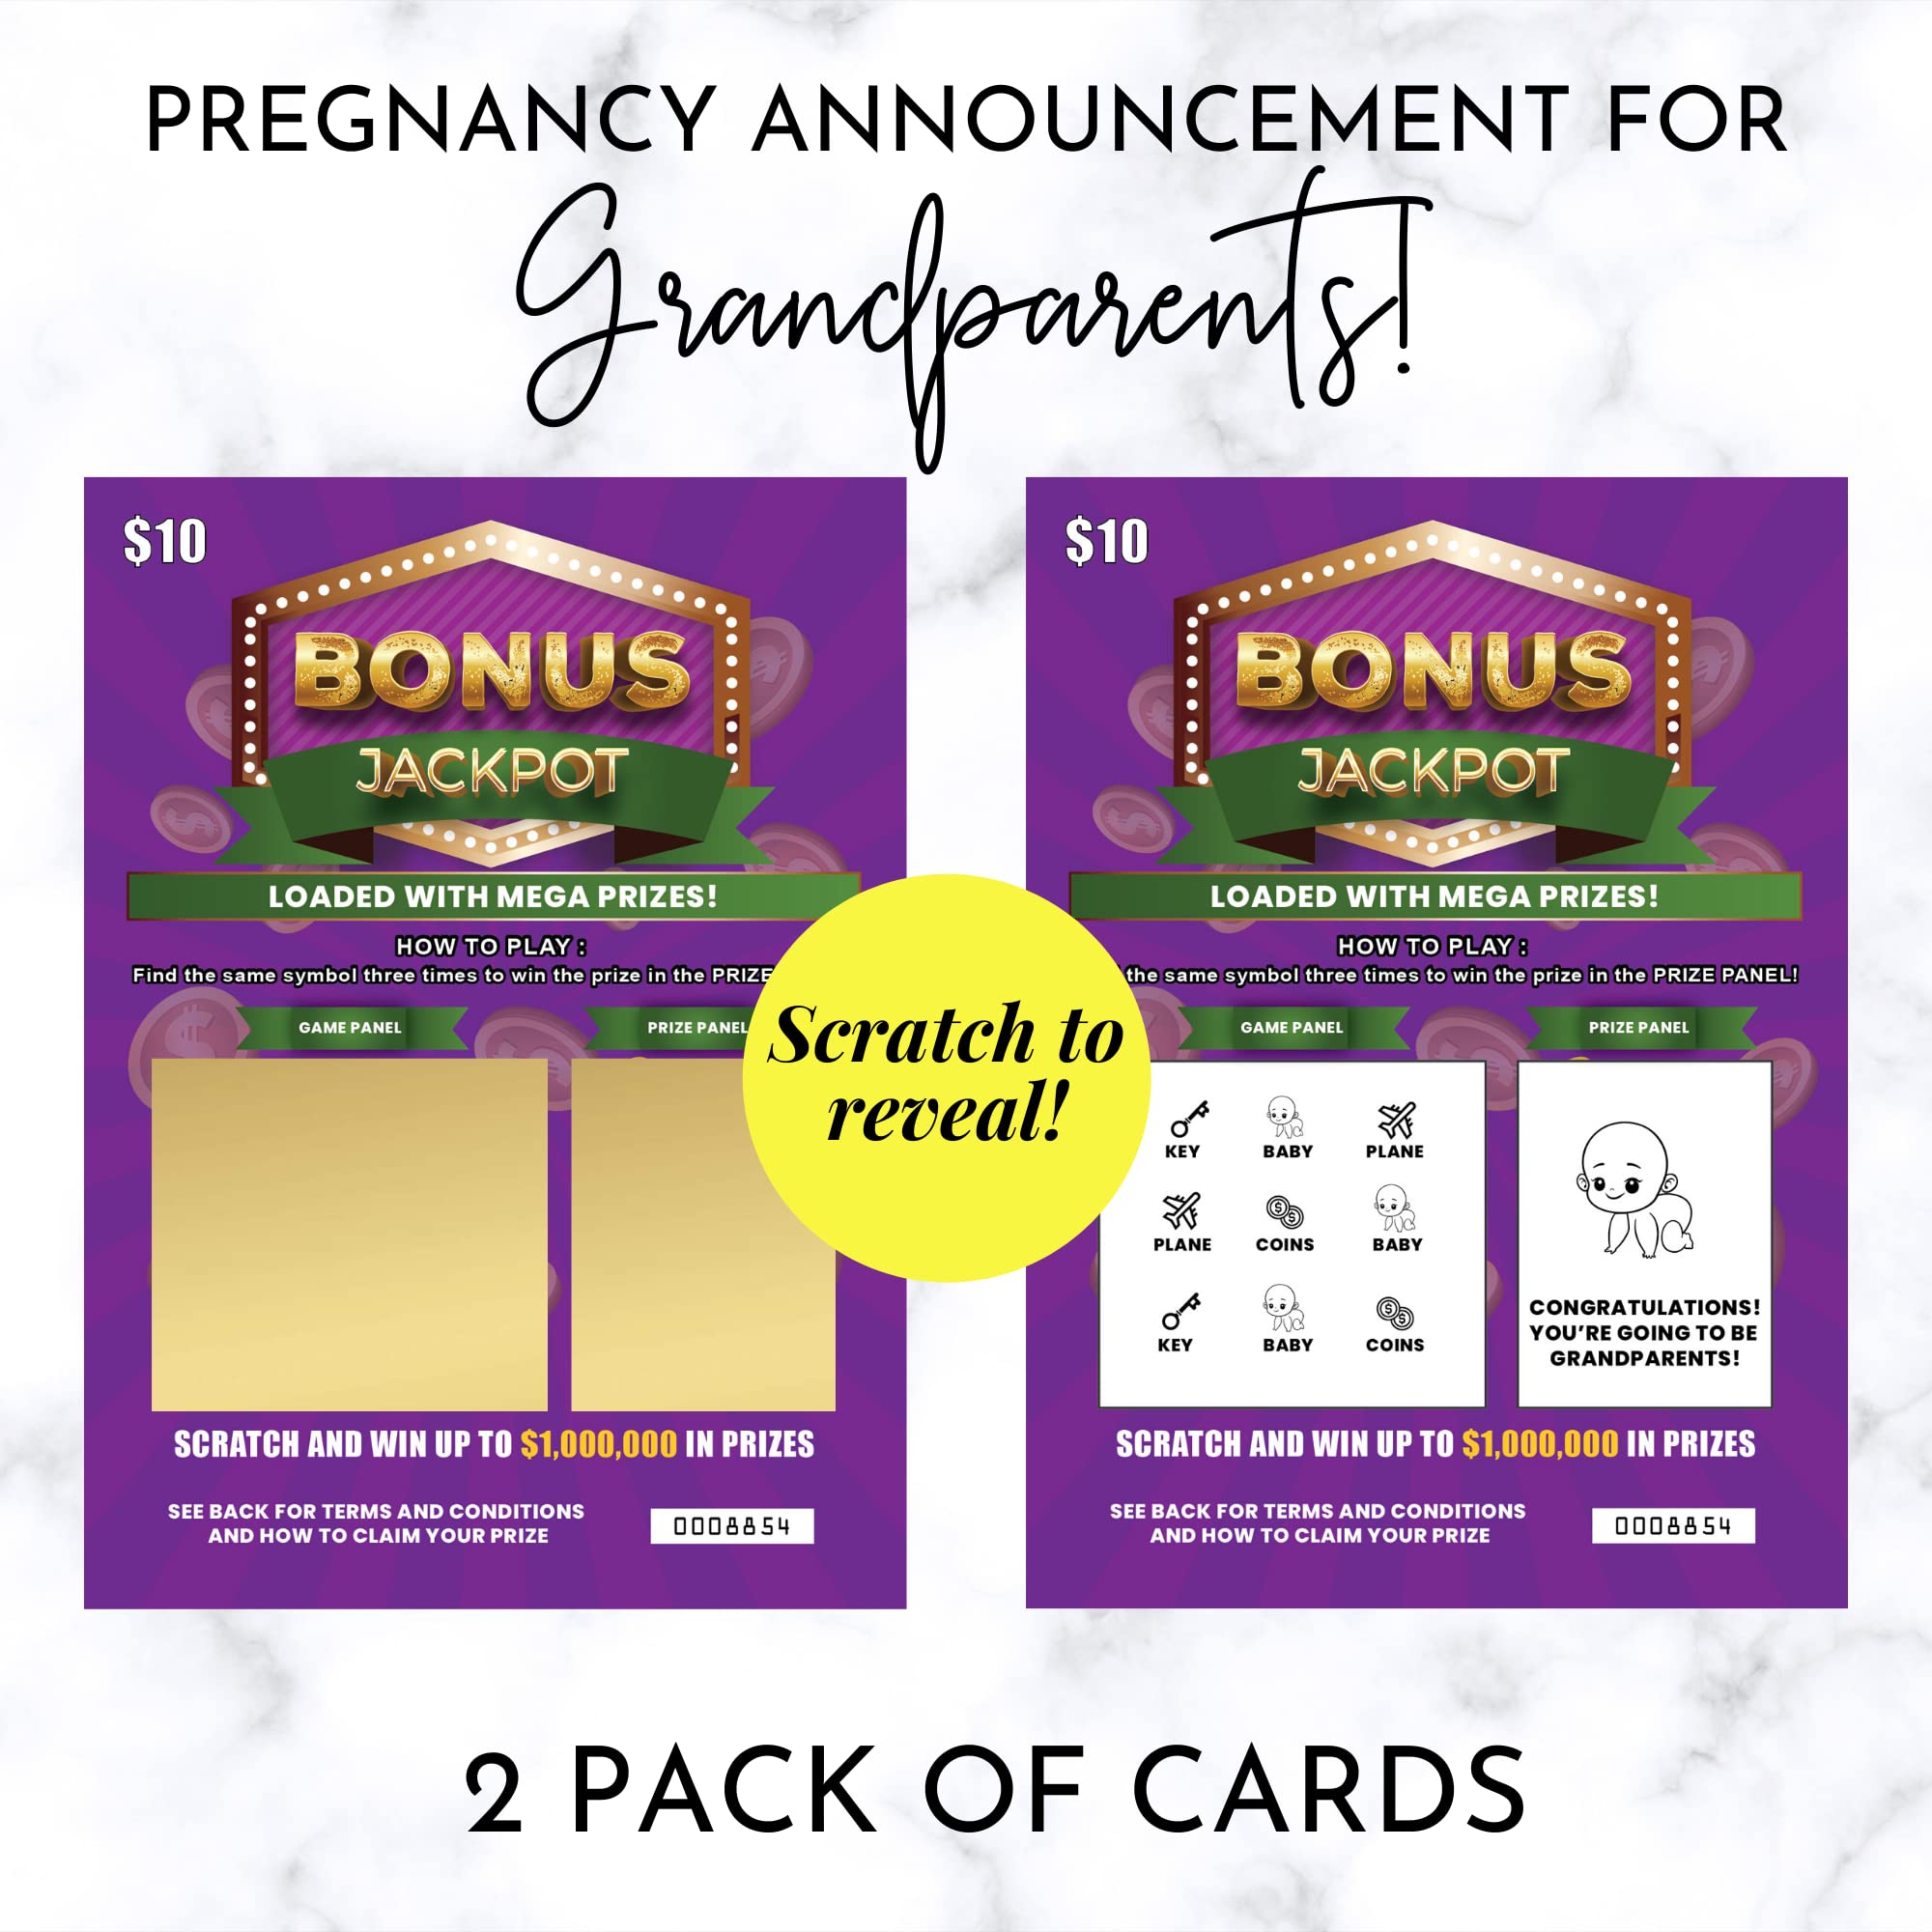 Zoschie 2 Pregnancy Announcement for Grandparents Lottery Ticket Scratch Off Cards - Grandparents Baby Announcement and Pregnancy Reveal Gift, Baby Surprise Scratchers for Grandma, Grandpa and Family